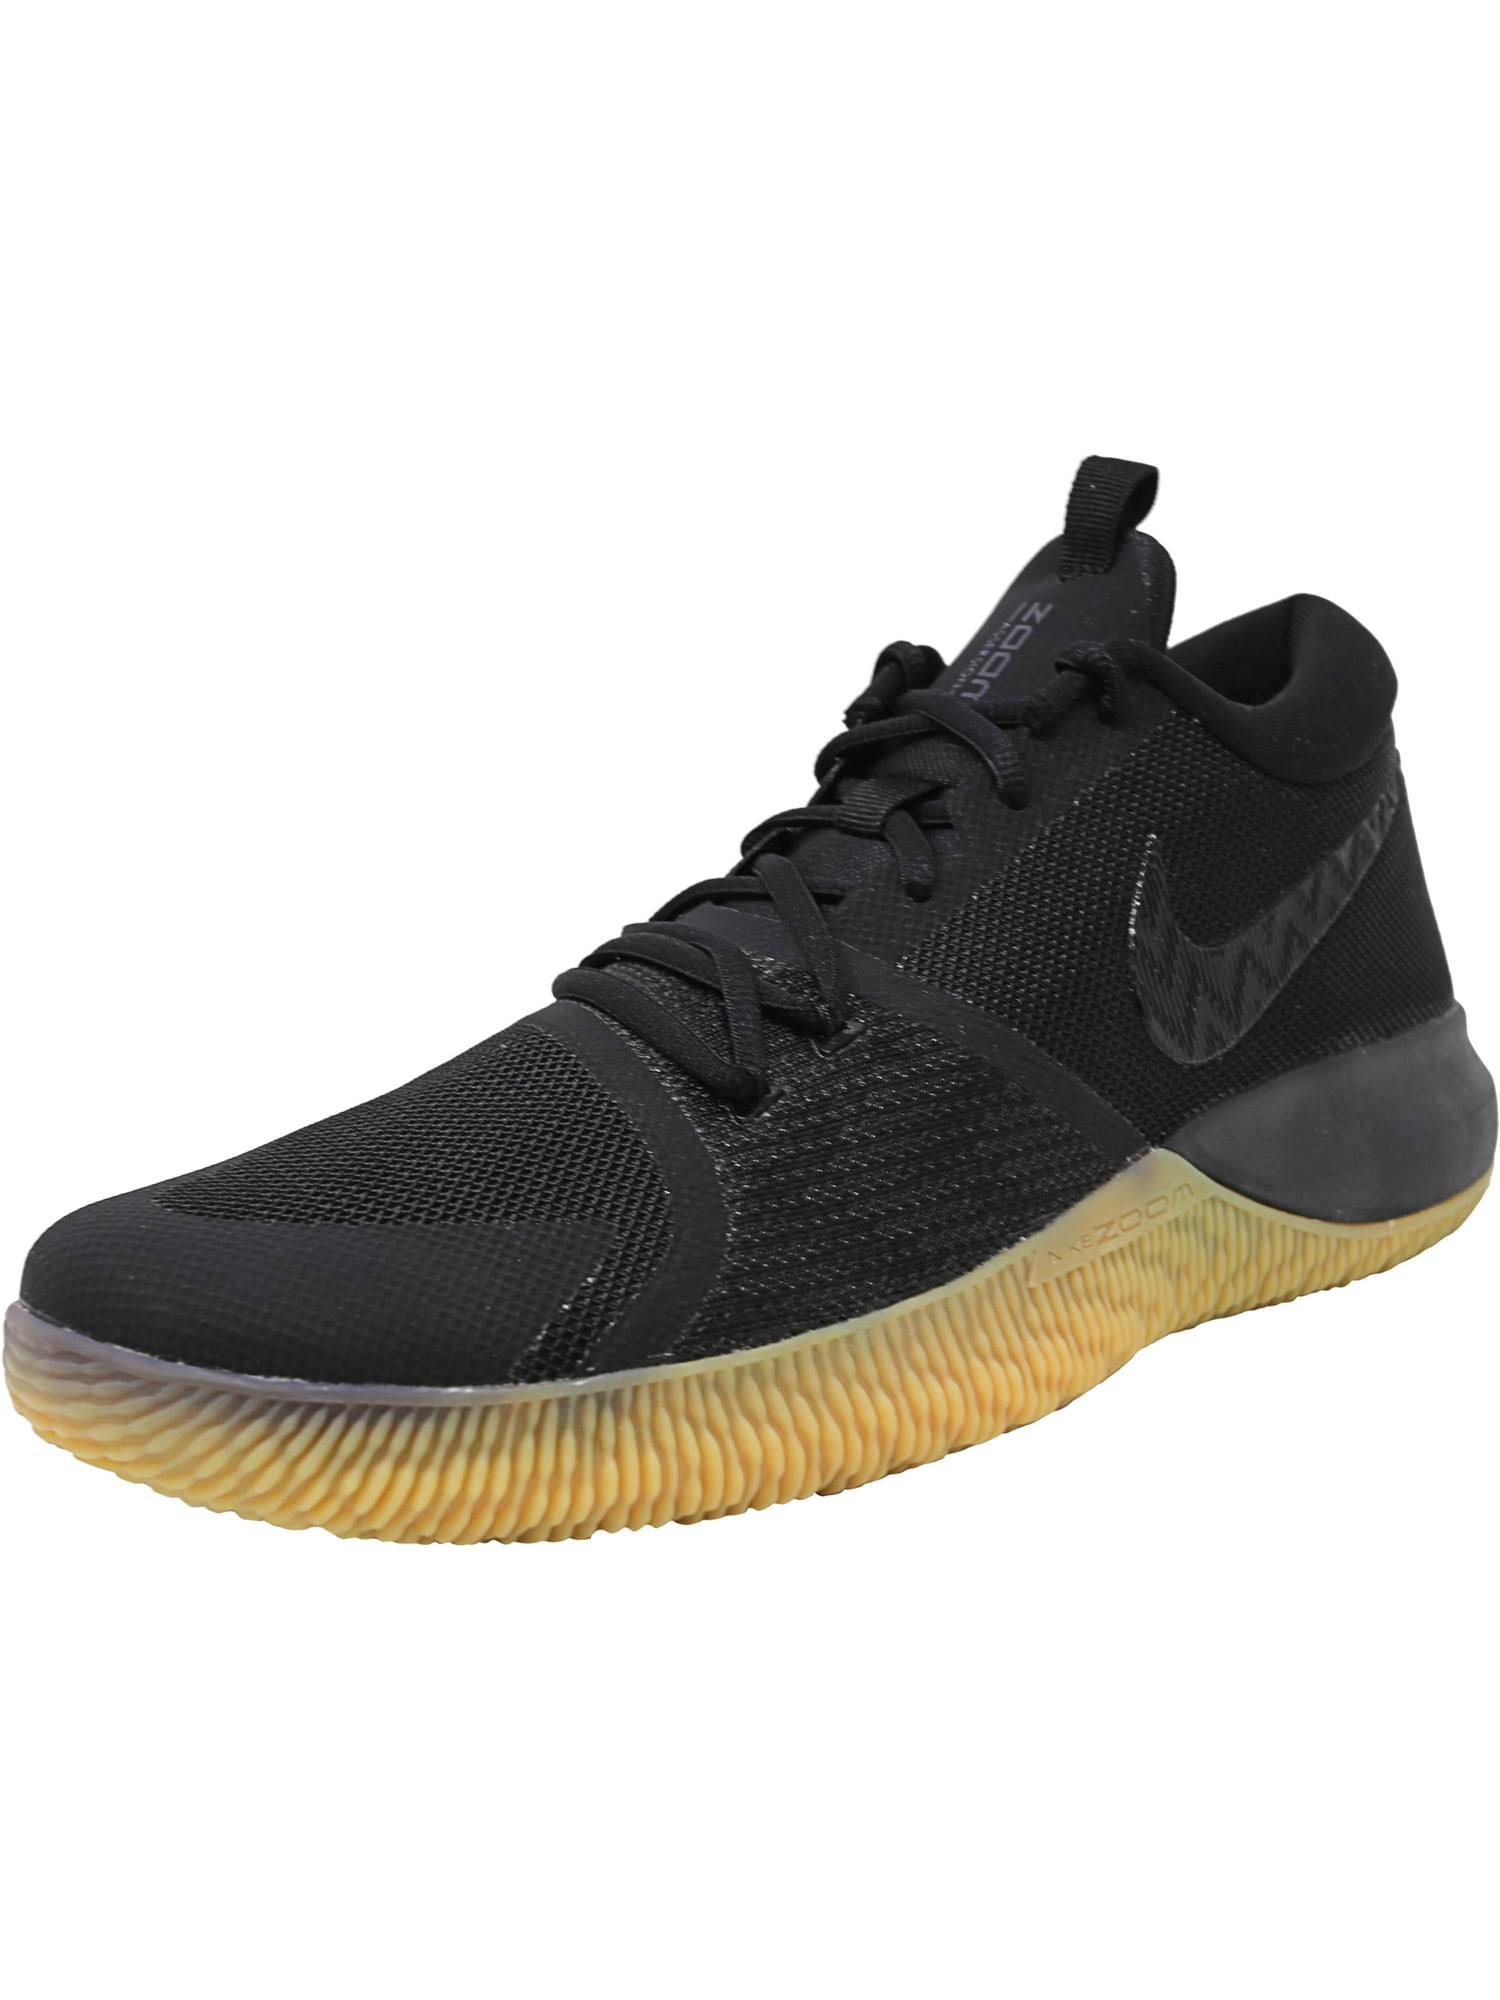 gum sole basketball shoes